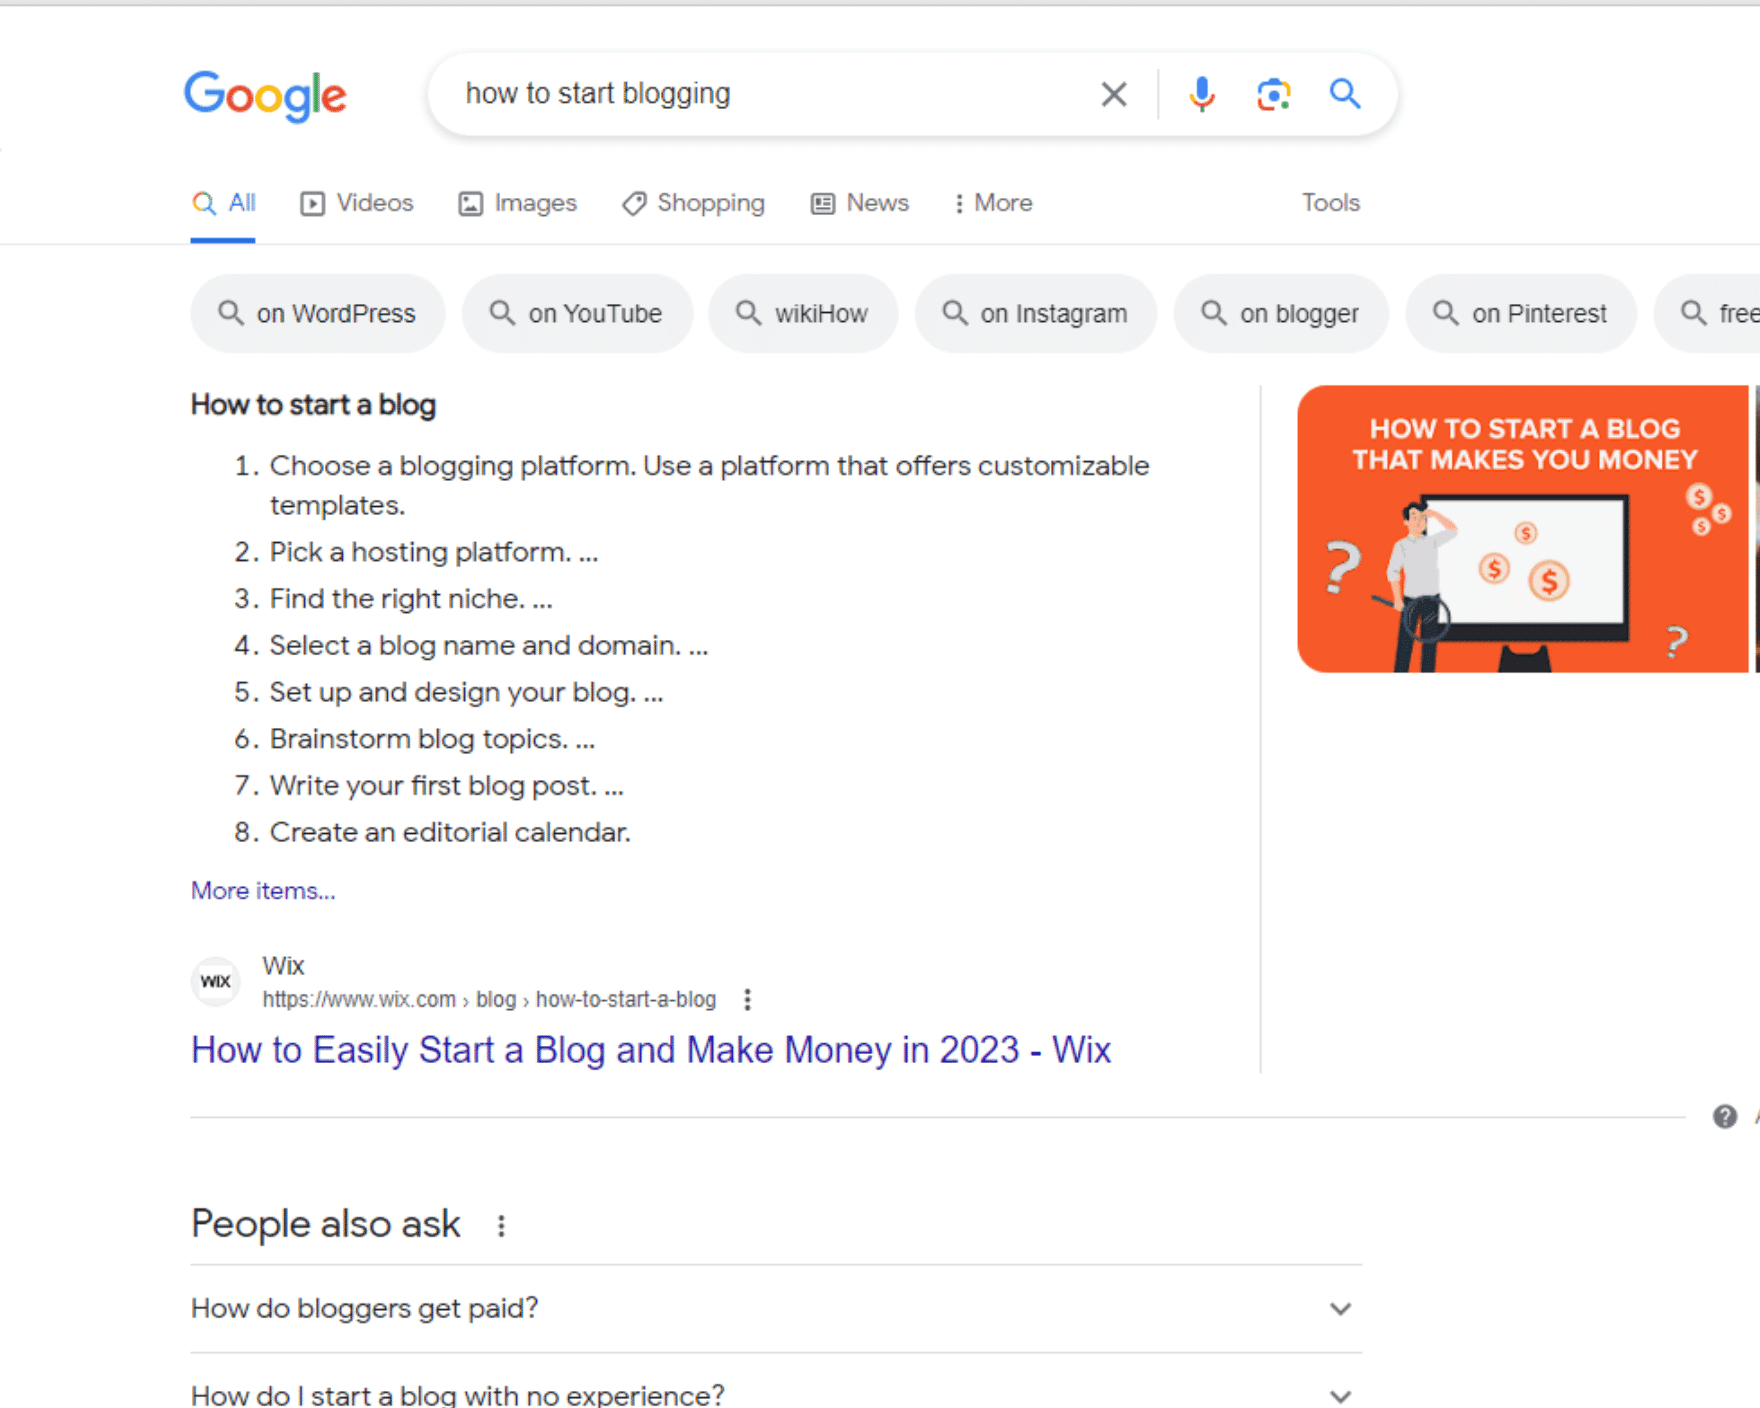 How to Rank Higher on Google "rank higher on google"